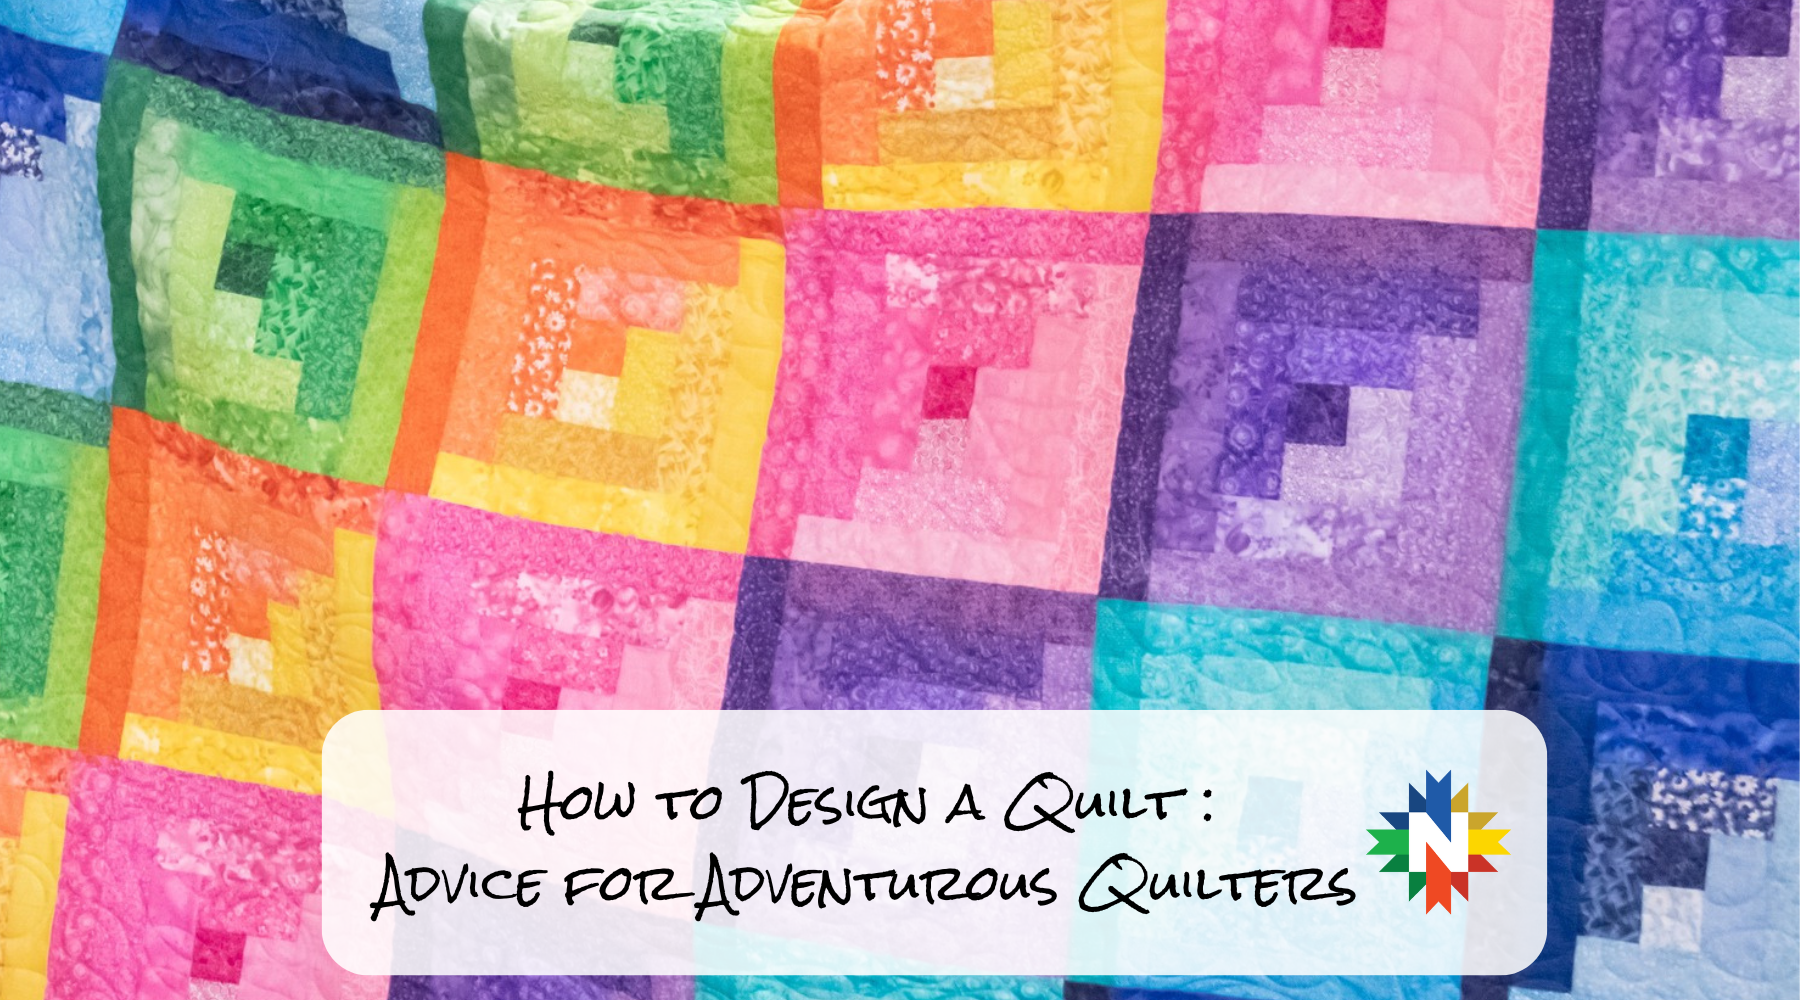 Header image text reads "How to Design a Quilt: Advice for Adventurous Quilters." Background is a colorful log cabin block quilt.